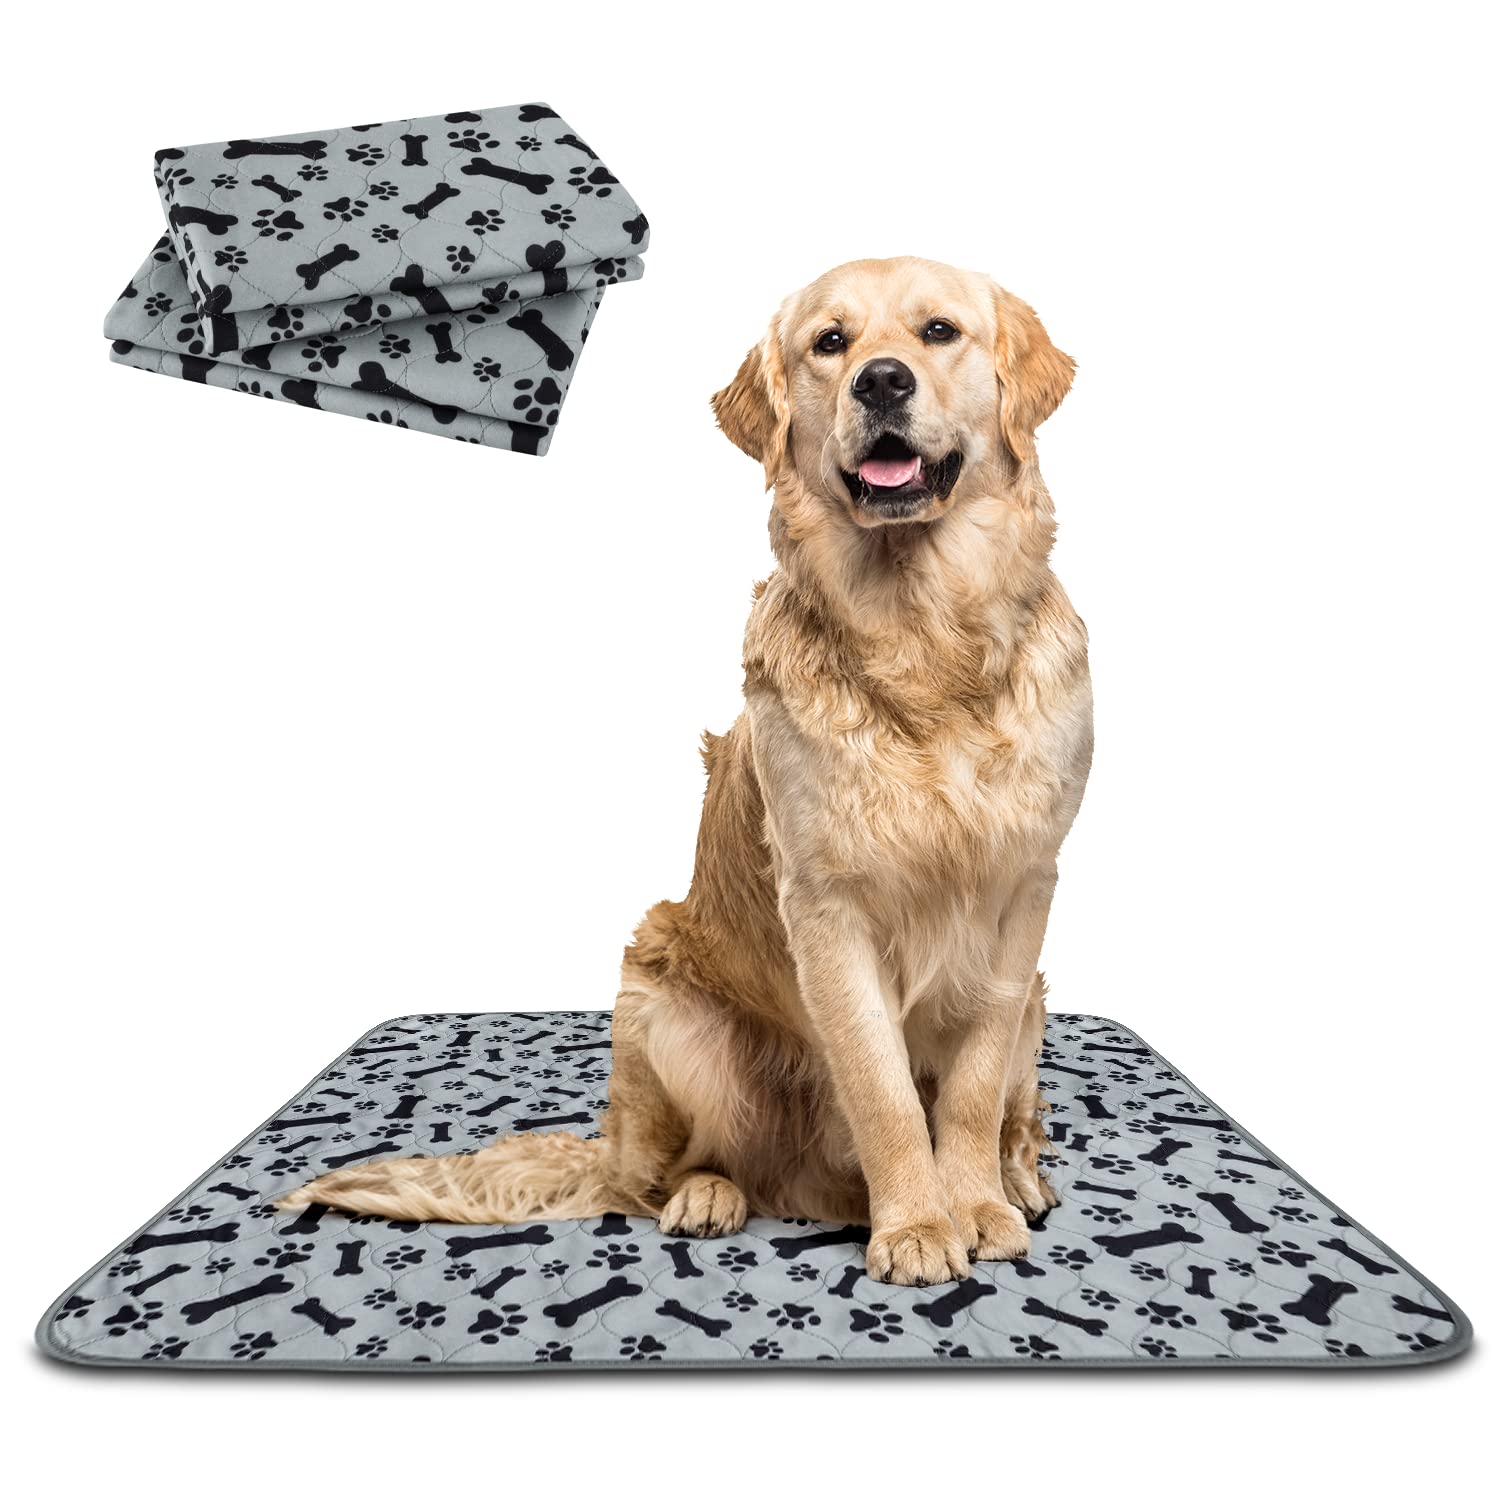 The Proper Pet Washable Pee Pads for Dogs, Reusable Puppy Pads - Easy to clean, Waterproof Dog Mat, Puppy Mat - Reusable